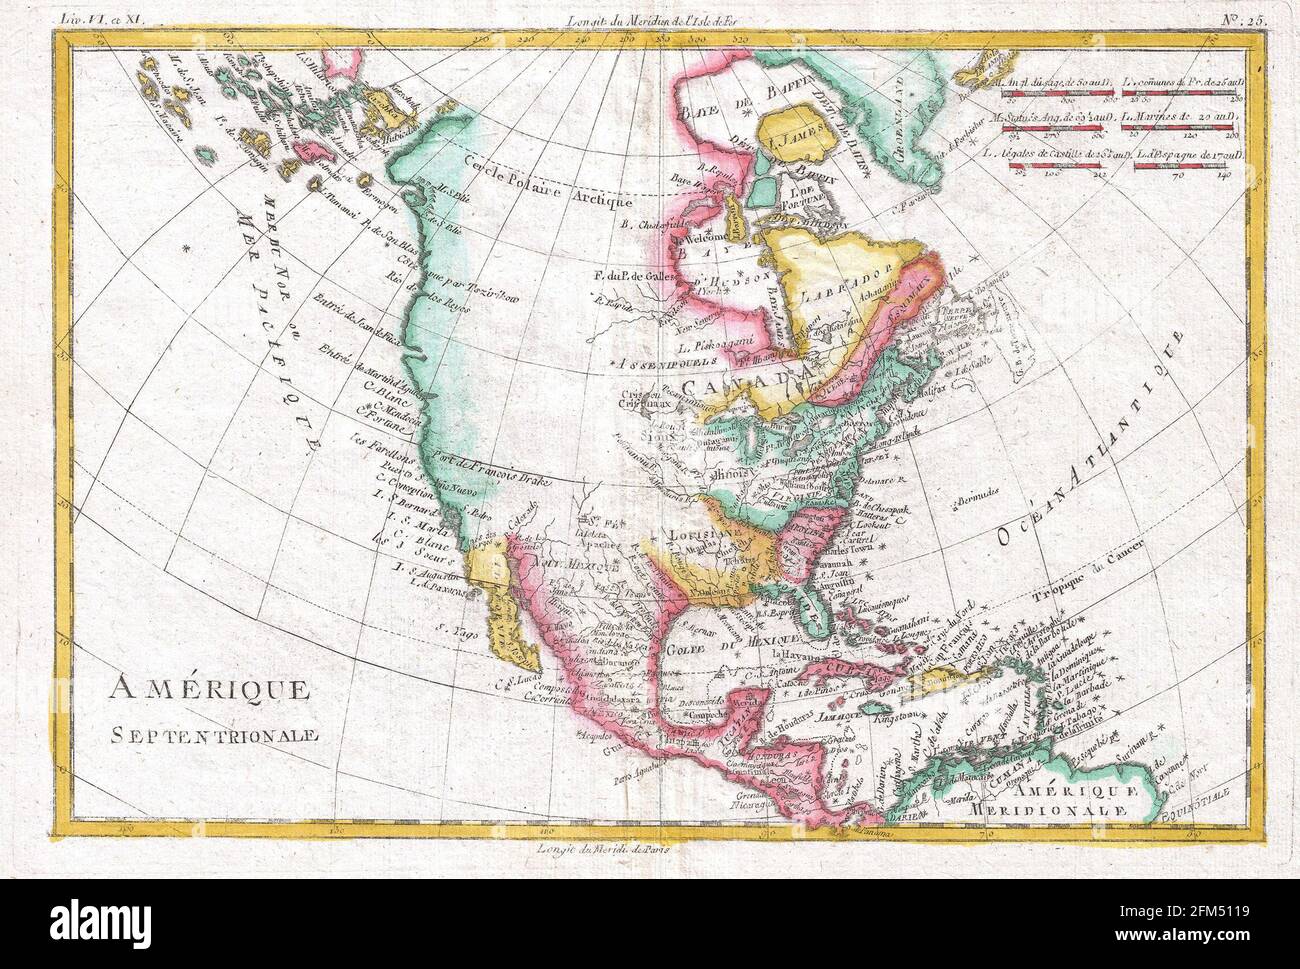 Vintage copper engraved map of North America from 18th century. All maps are beautifully colored and illustrated showing the world at the time. Stock Photo